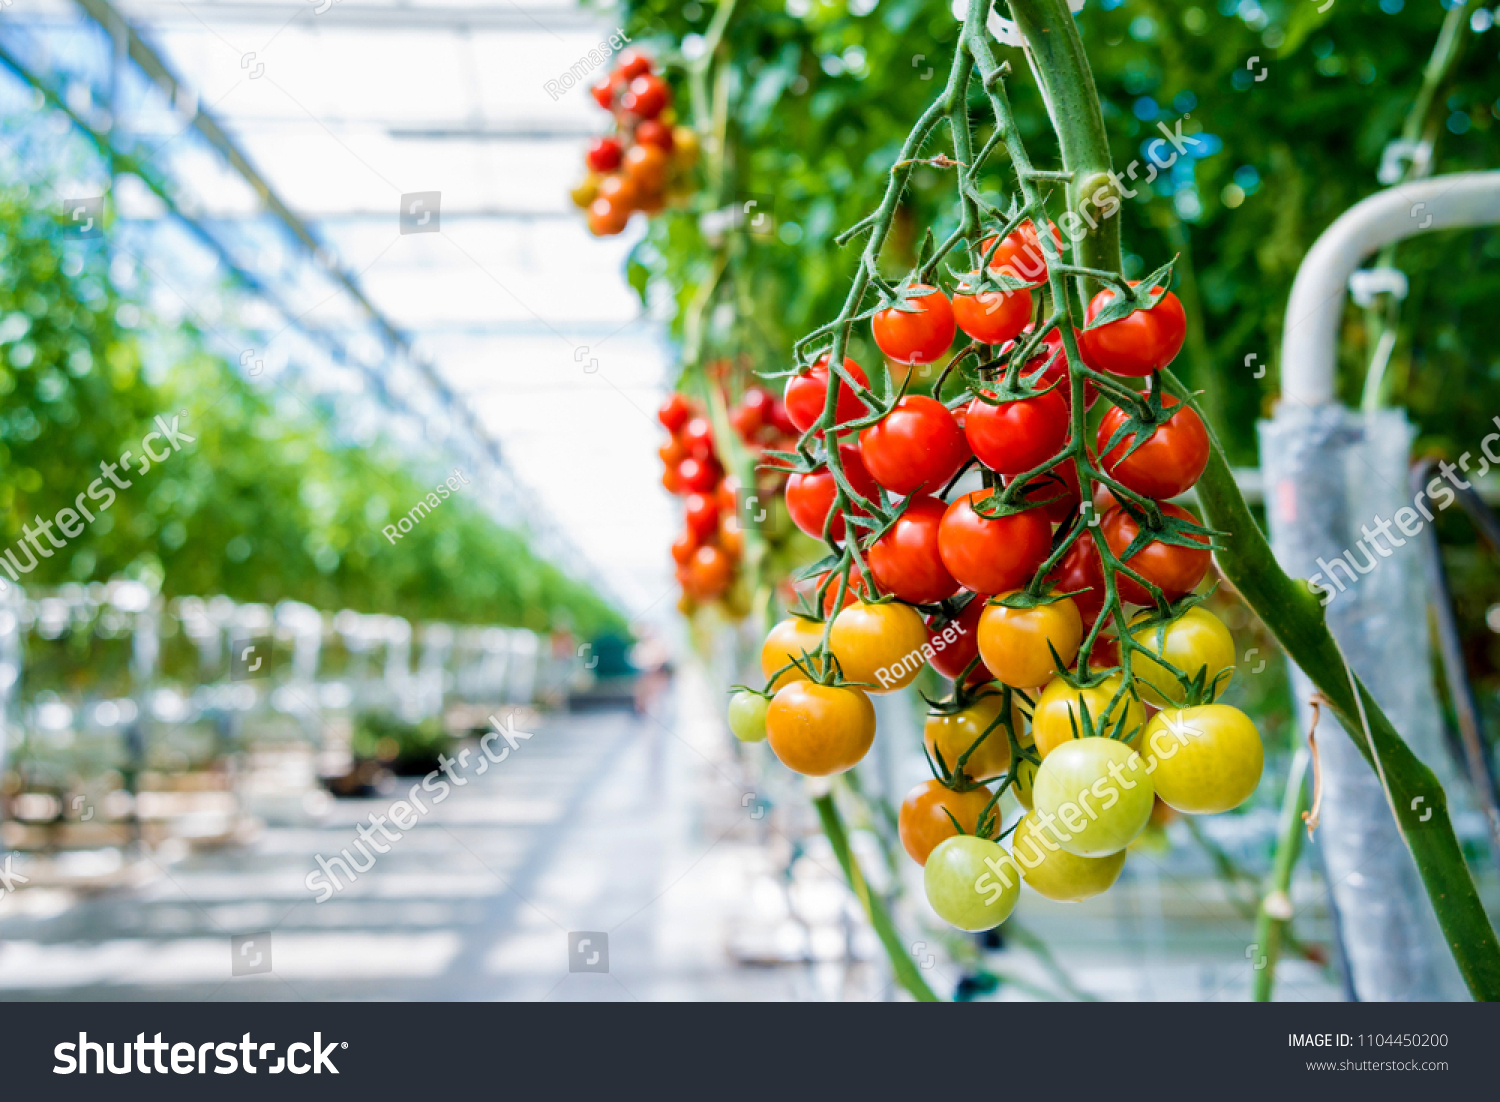 Beautiful red ripe tomatoes grown in a greenhouse. Beautiful background #1104450200